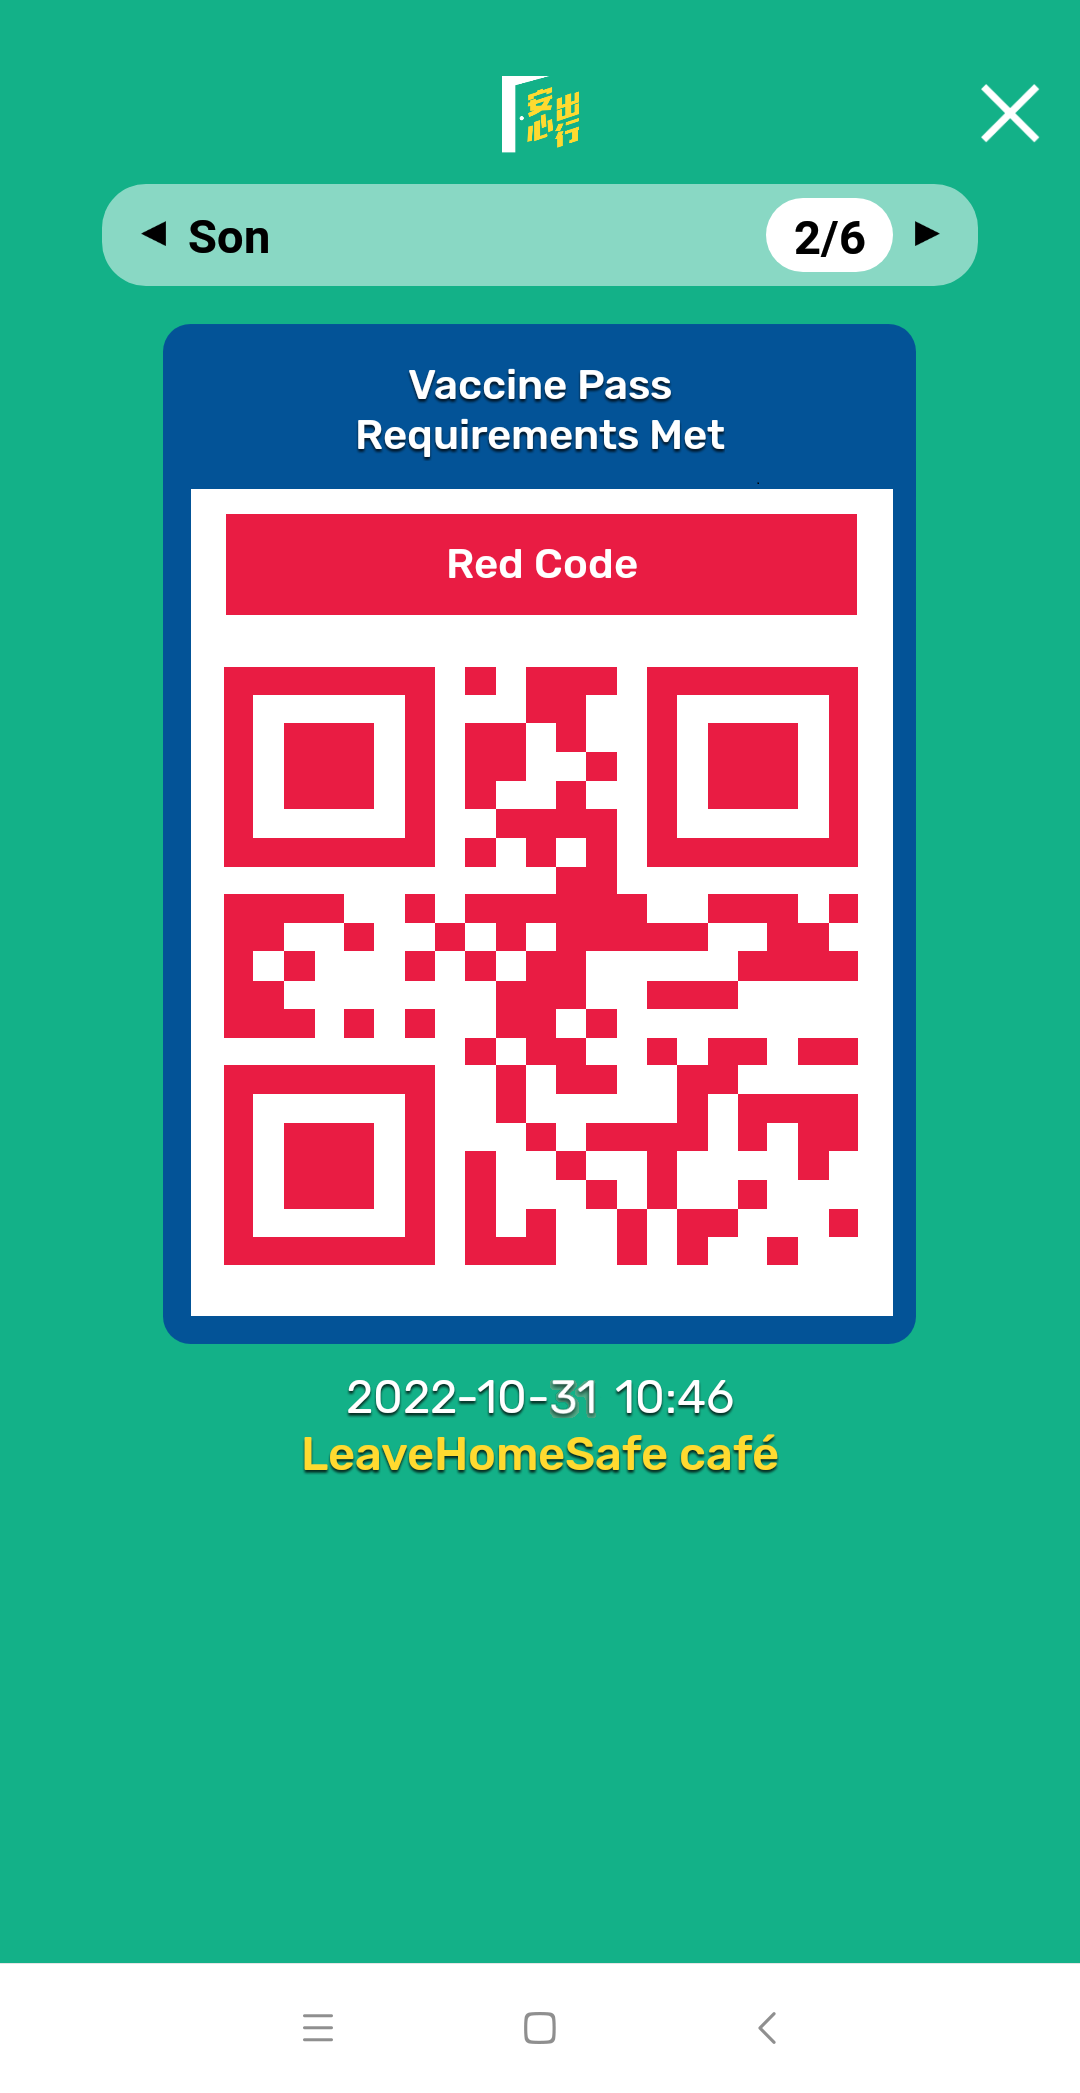 The latest version 3.5.0 of the "LeaveHomeSafe" mobile app has been launched today (October 31). A new function of automatic checking of Red and Amber Codes for the Vaccine Pass of accompanied persons has been added to the mobile app to help differentiate persons with a higher risk of COVID-19 infection.